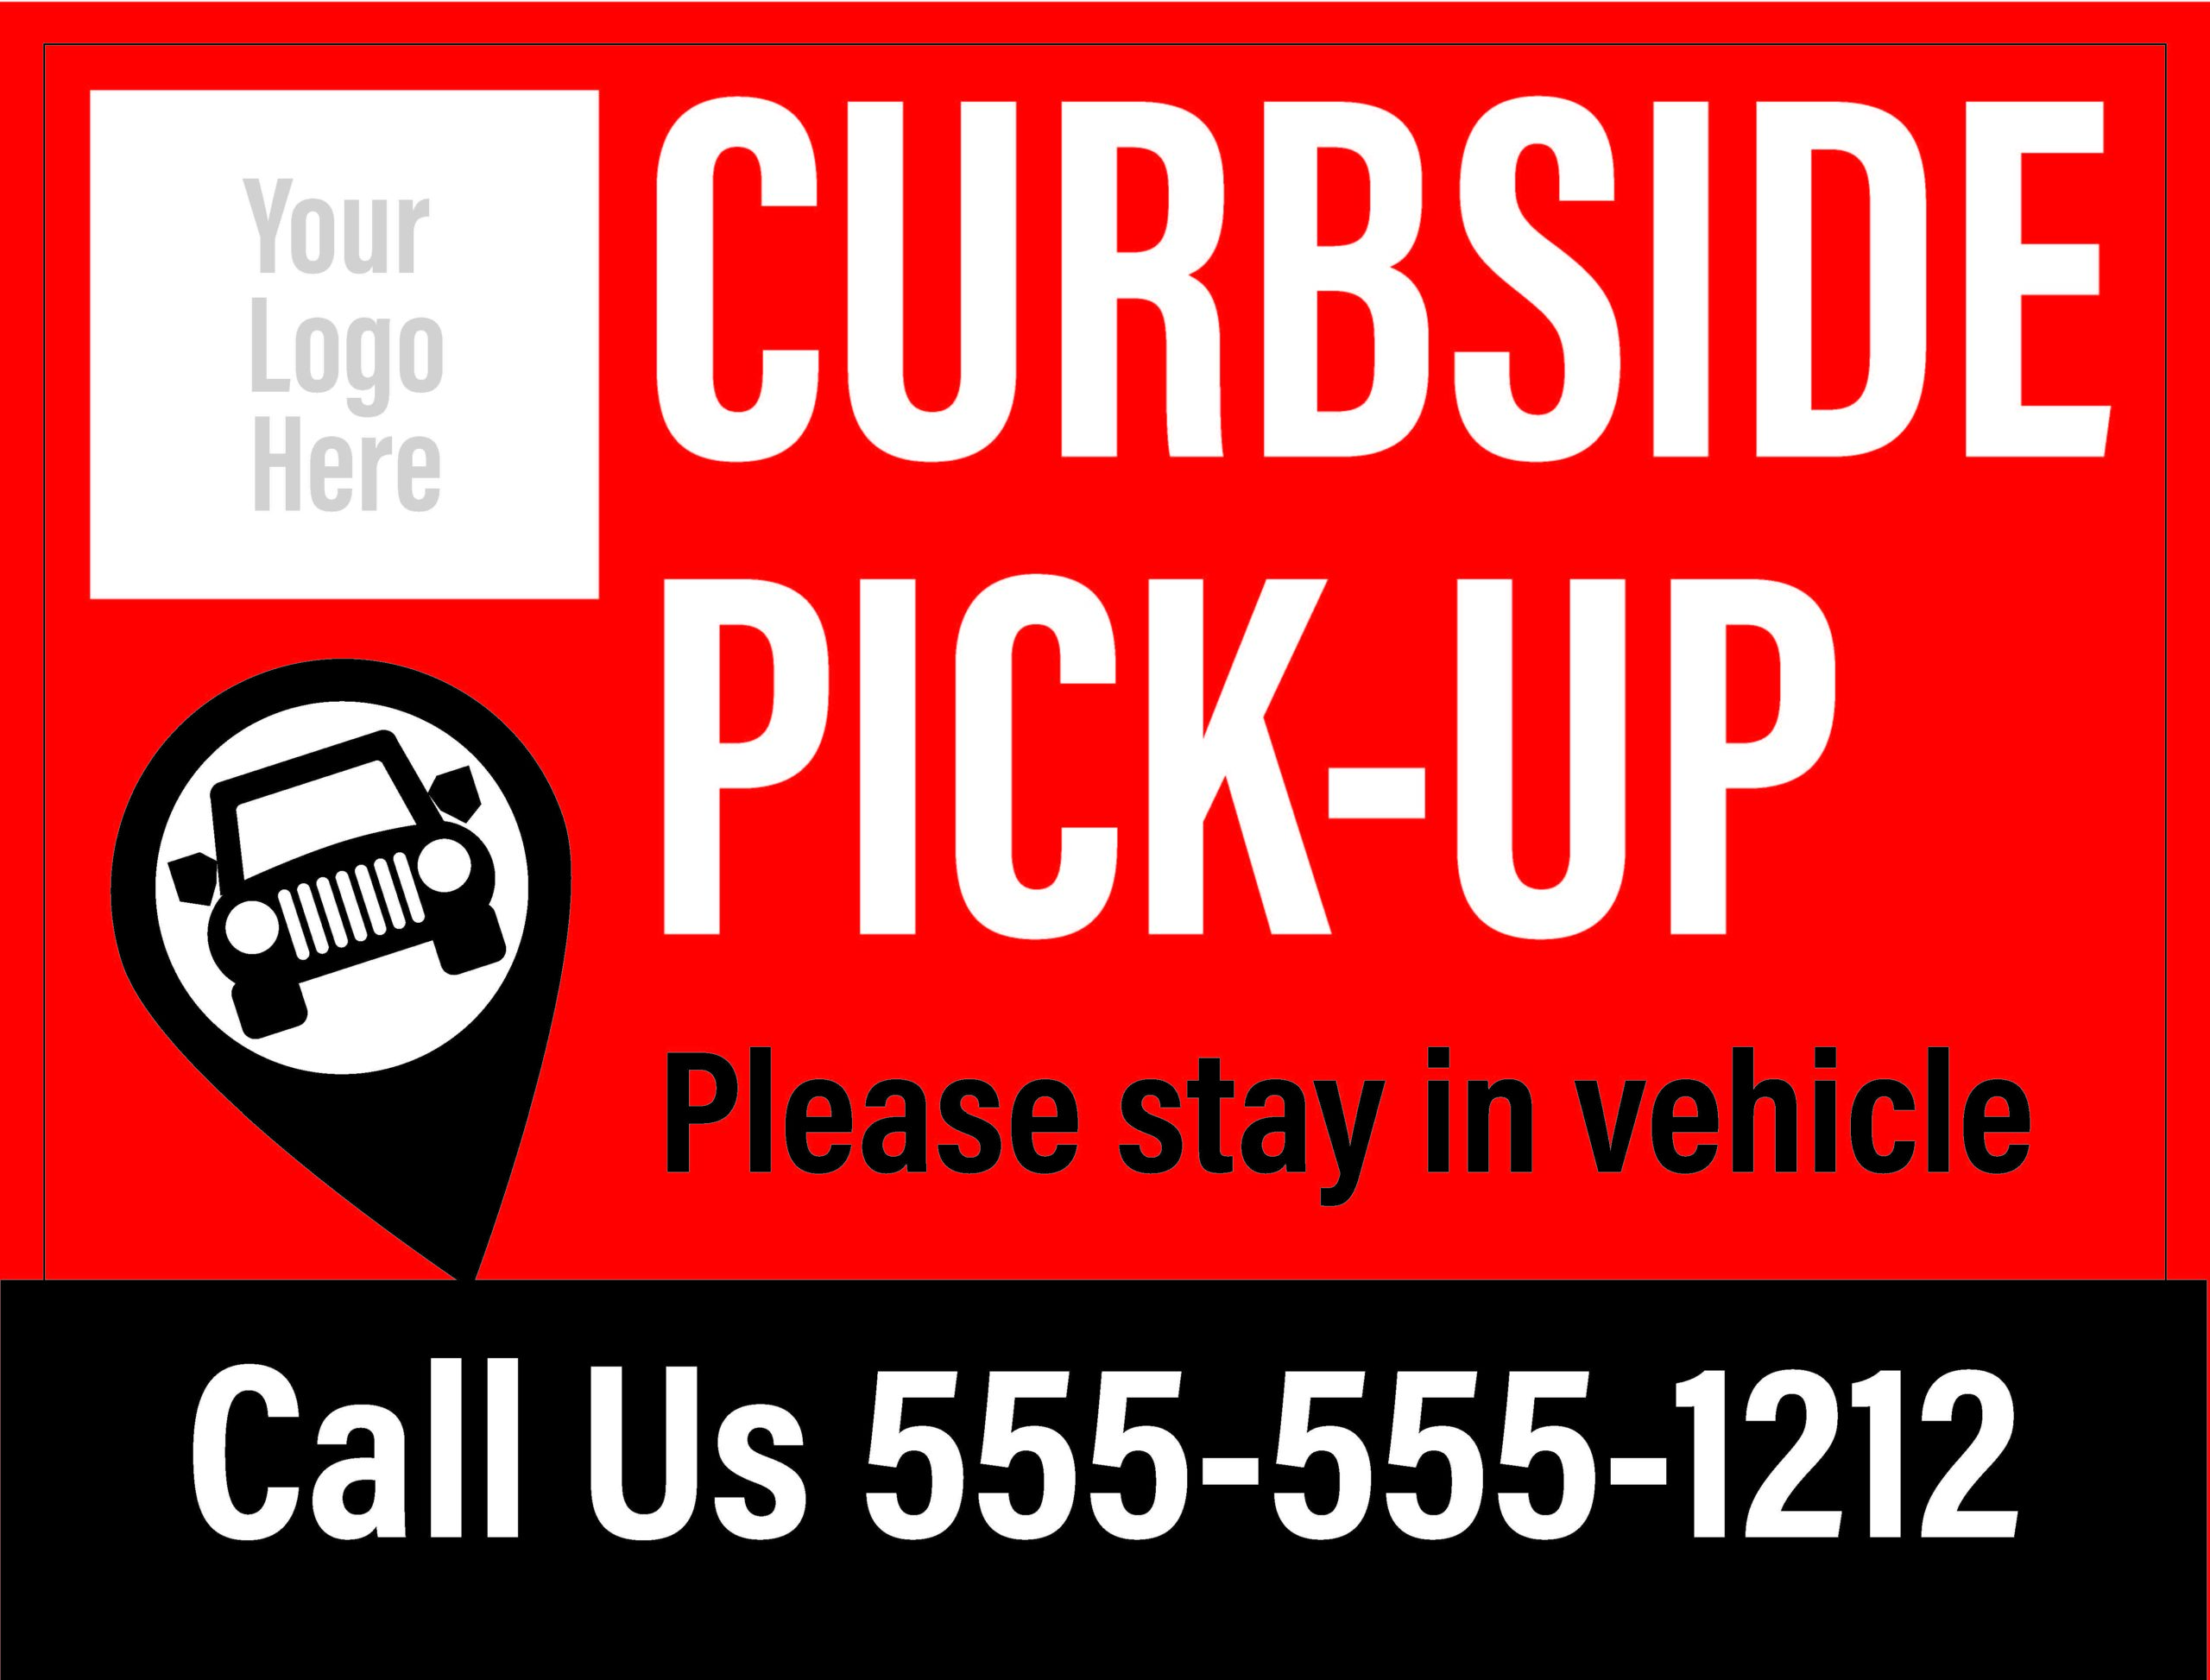 Curbside Pickup Signs Coroplast Single Sided 18x24"